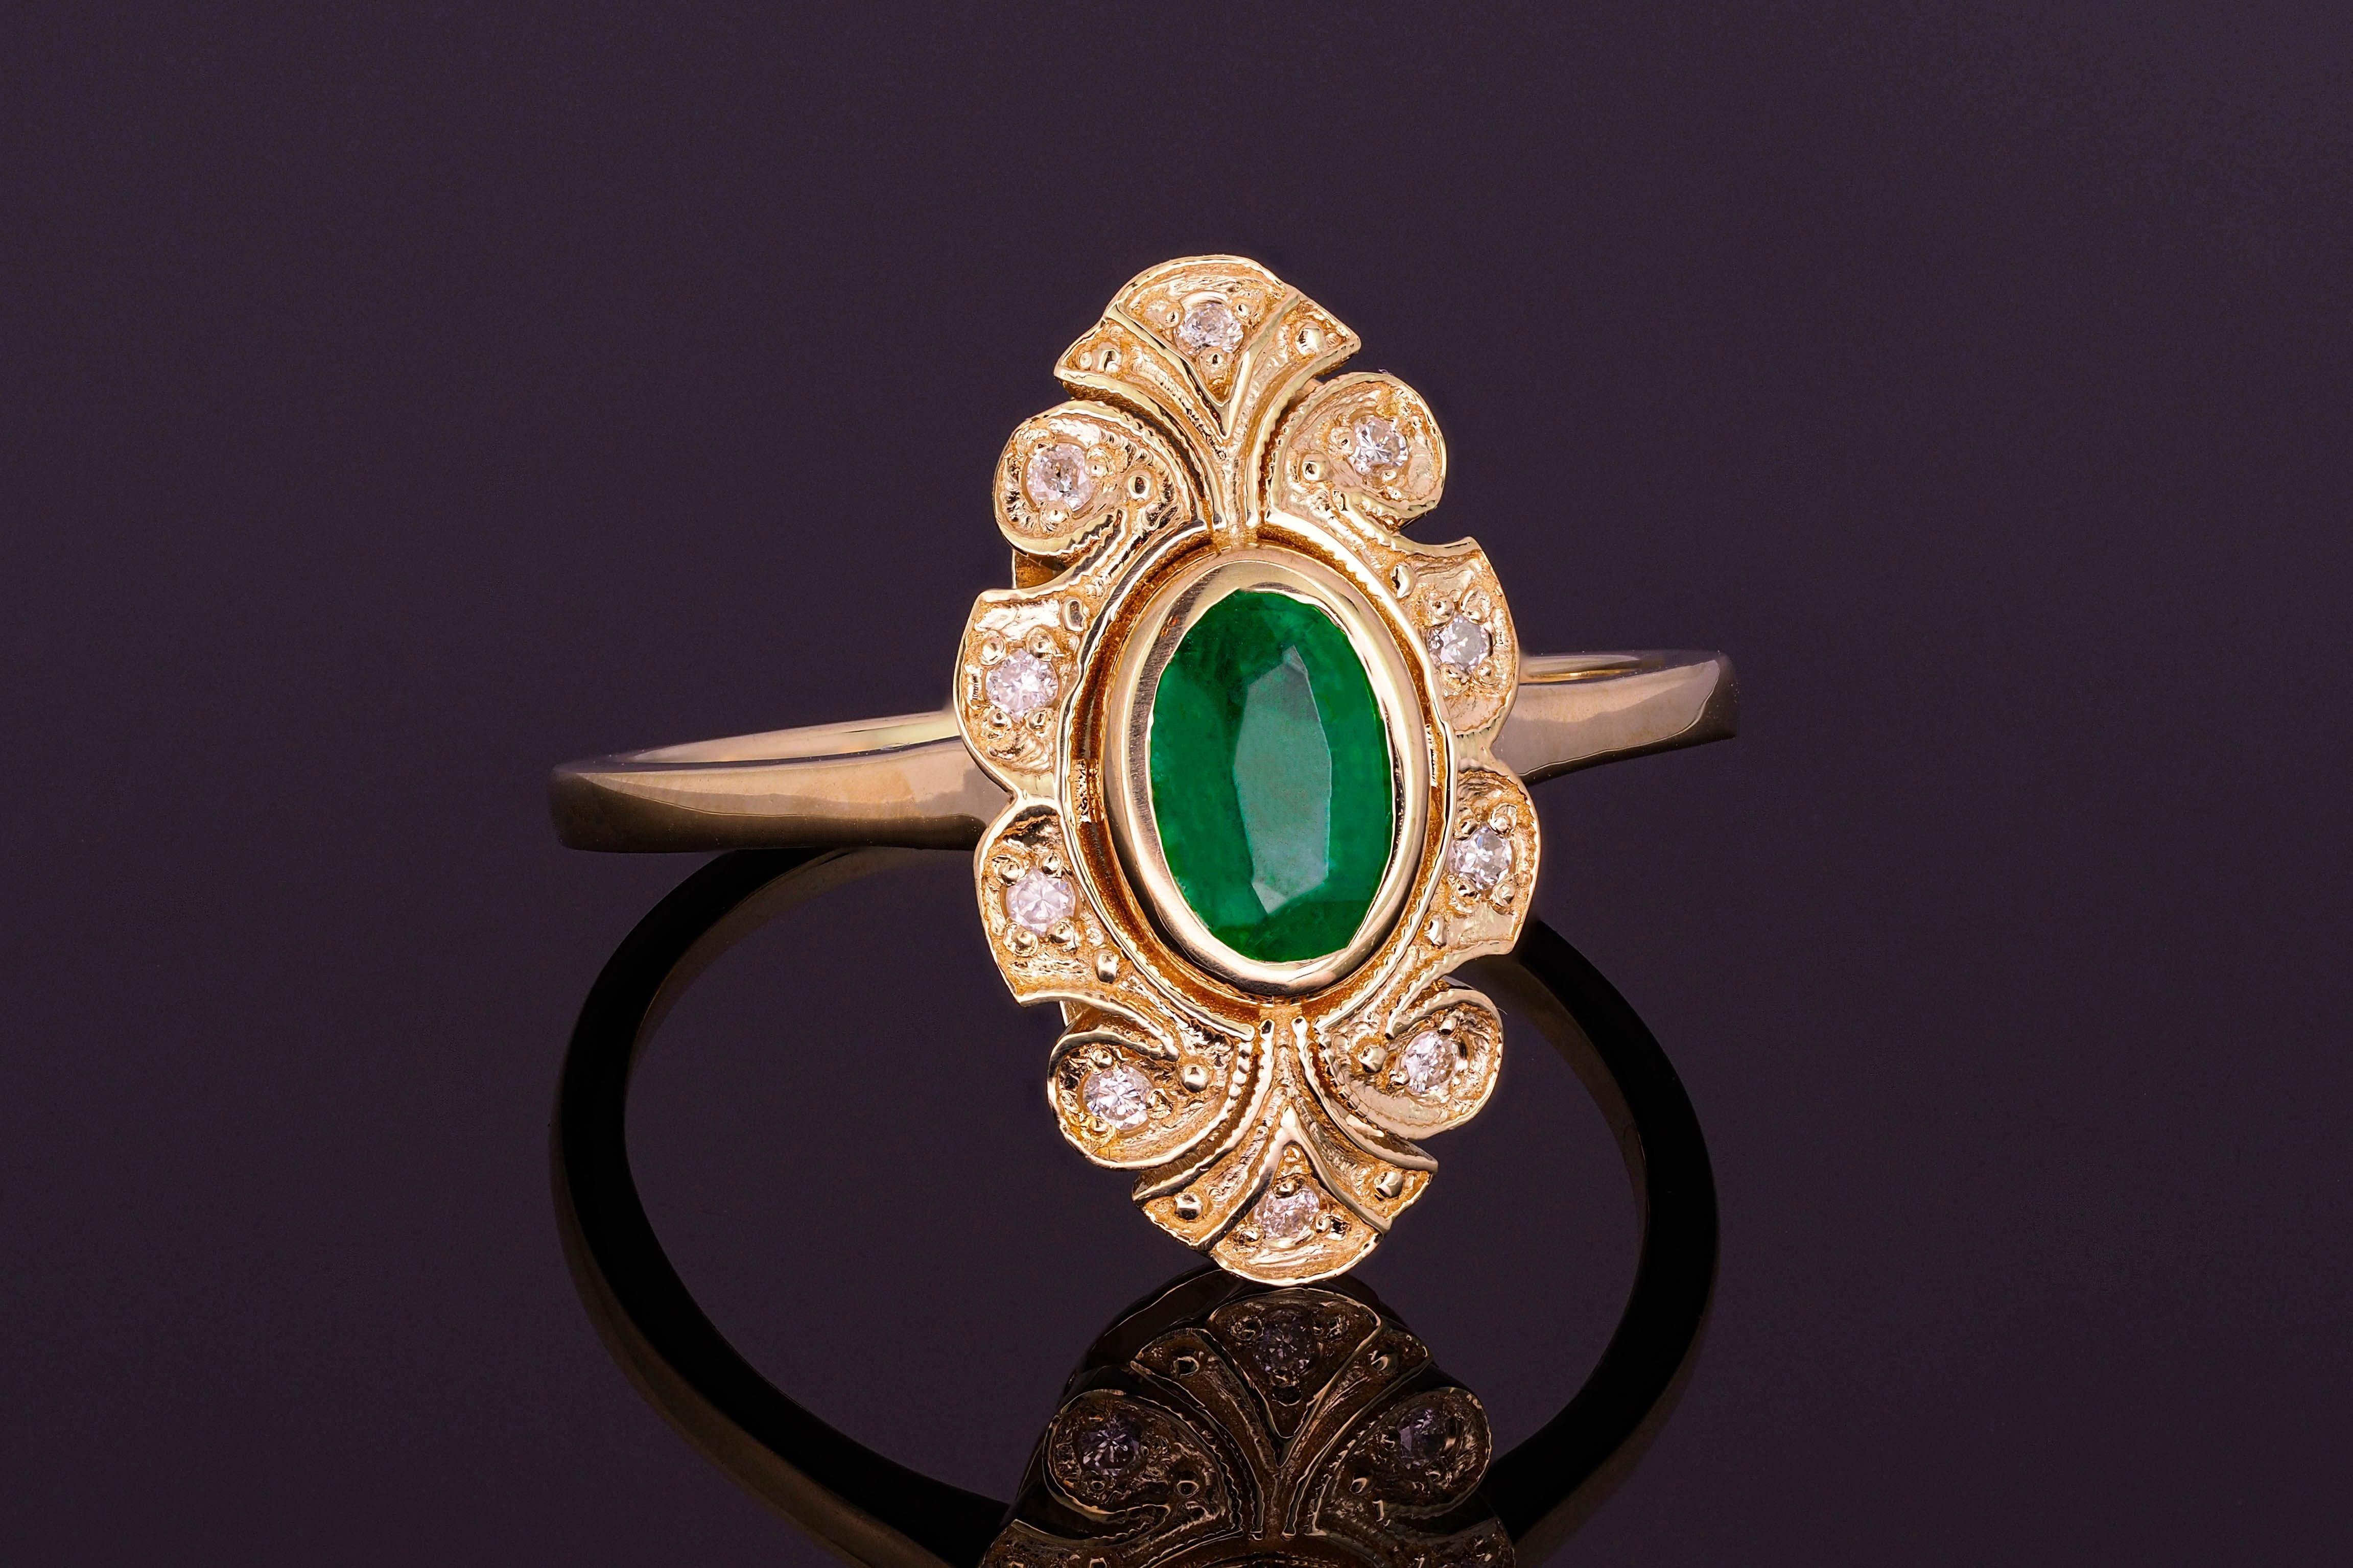 For Sale:  14k Gold Ring with Oval Emerald and Diamonds, Vintage Inspired Ring 4